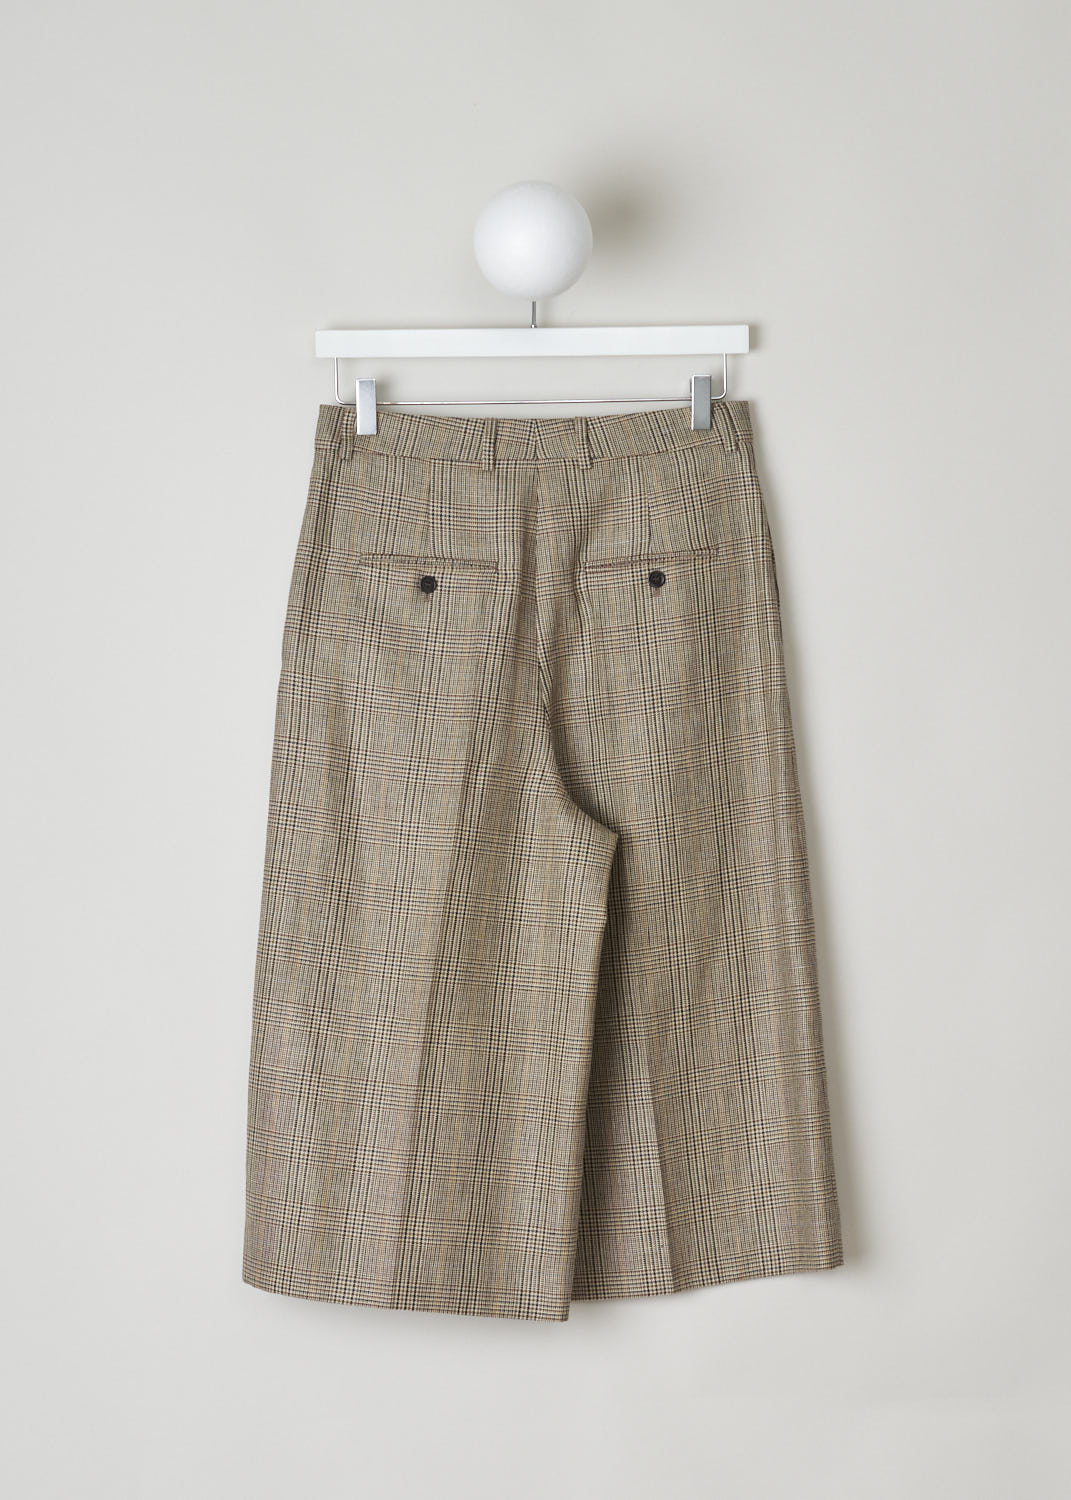 CELINE, BROWN CHECKERED CULOTTES, 024I_2P233_12MC, Brown, Back, Brown checkered culottes made from wool. These pants have belt loops and the closing option on this model is a concealed hook, button and zipper. Along the length of the pant legs, creases can be found. These pants have slanted pockets in the front and two buttoned welt pockets in the back.

